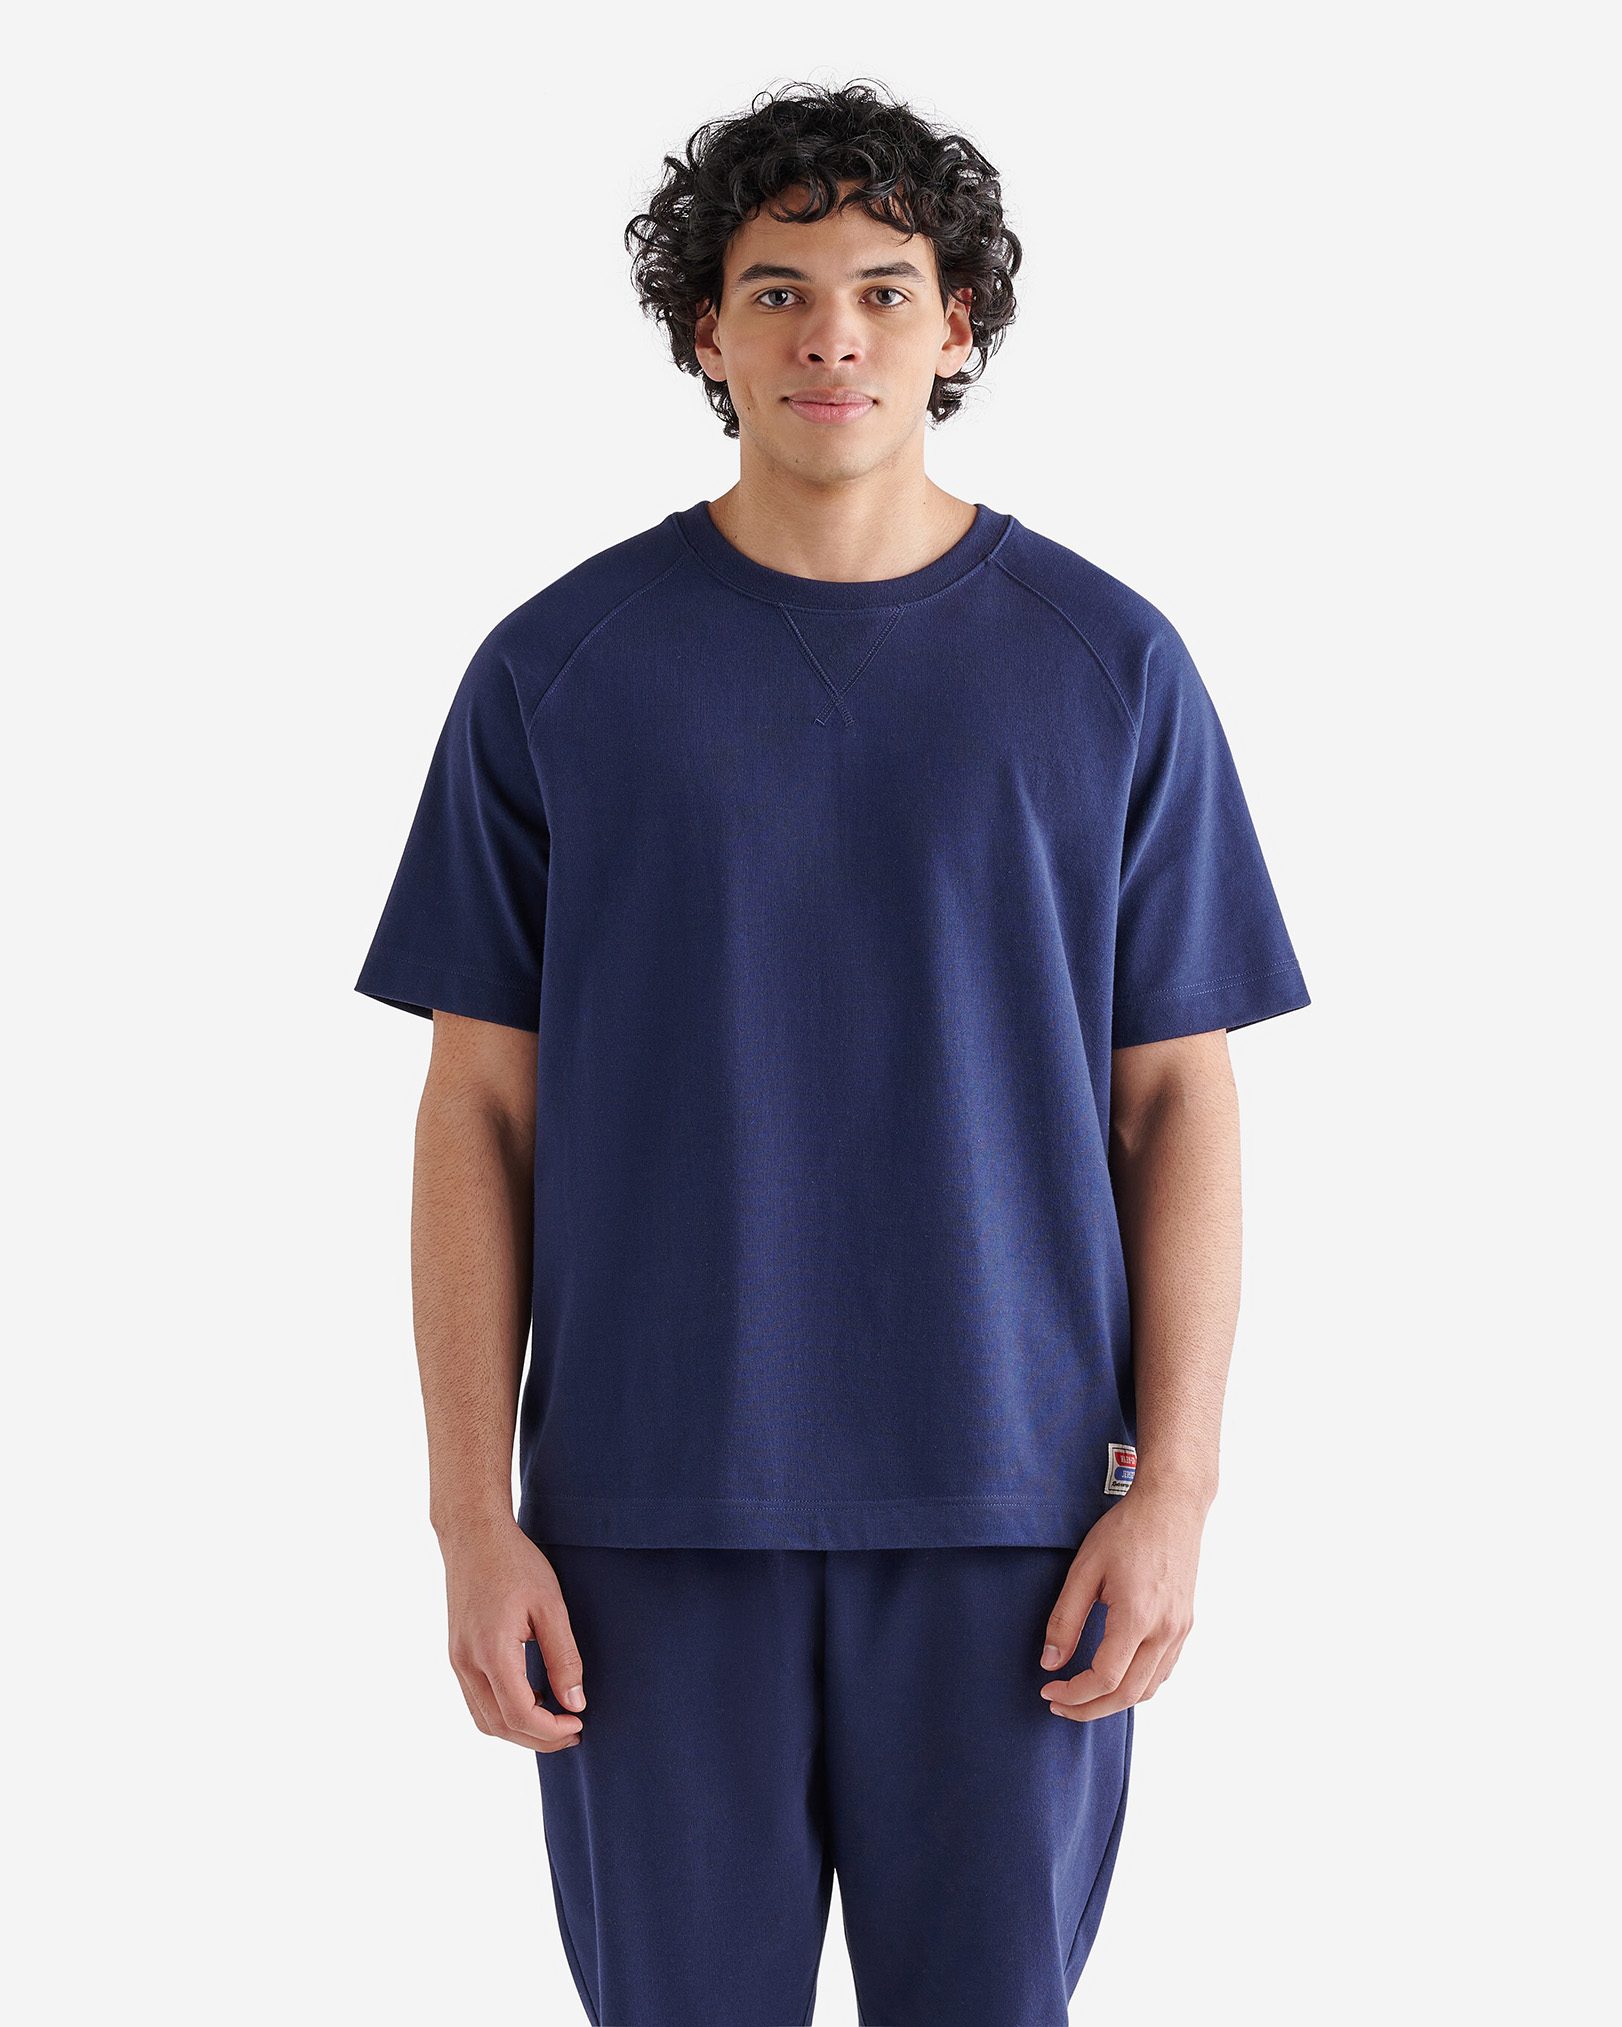 Roots Warm-Up Jersey Short Sleeve T-Shirt in Starnight Blue